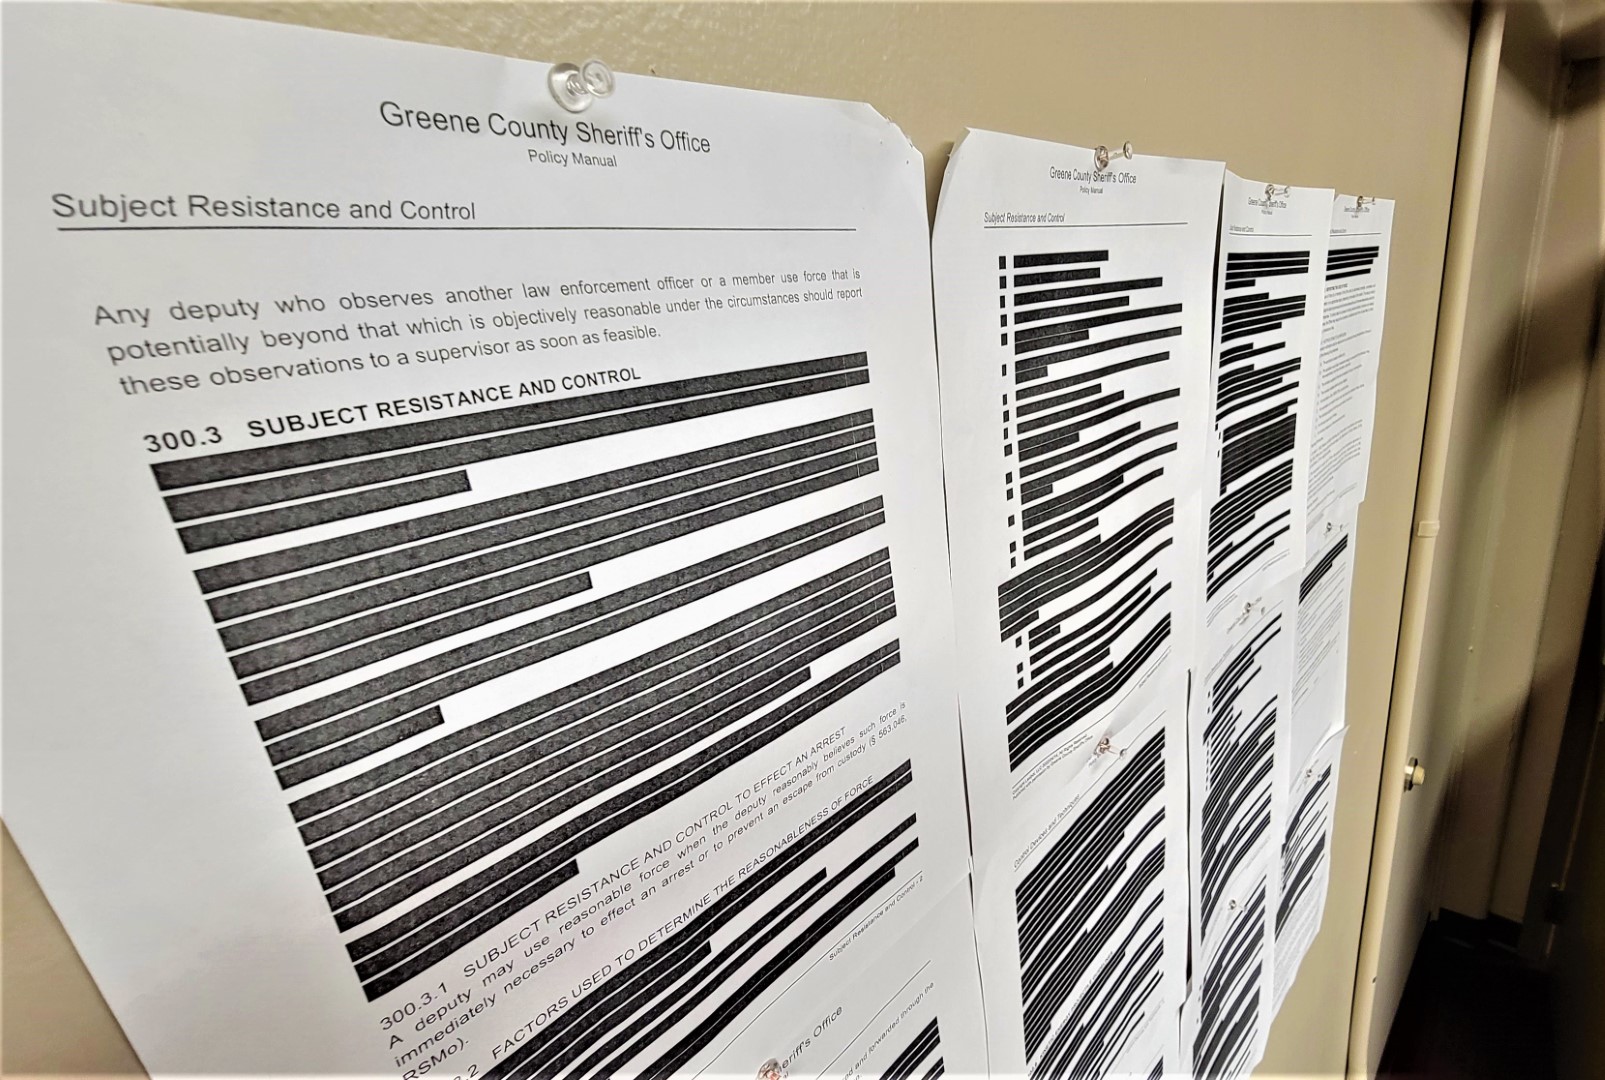 Sheriff's Office releases its Taser policy. It's almost entirely redacted